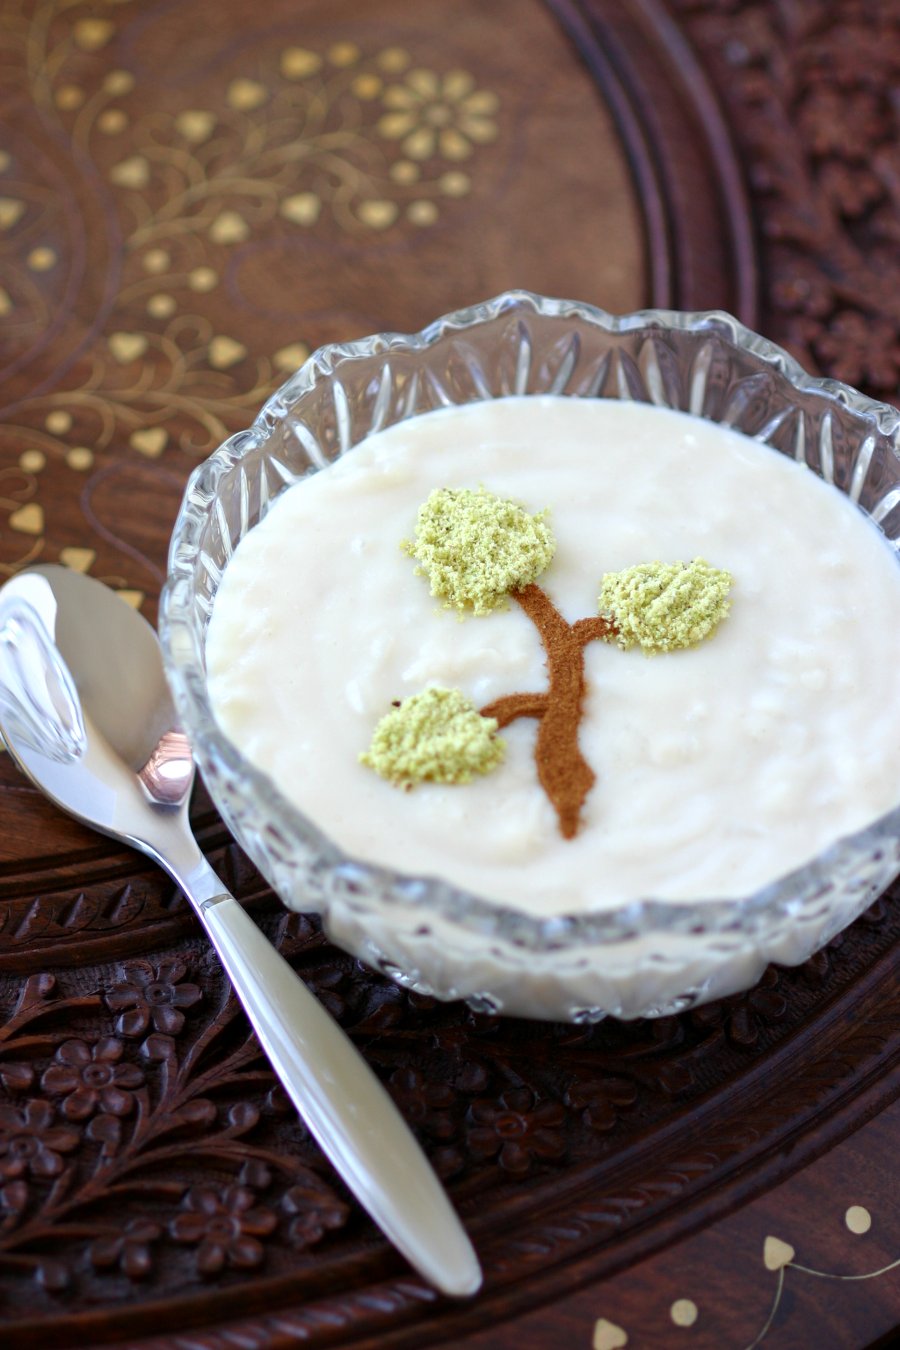 Served hot or chilled, this Vegan Middle Eastern Rice Pudding is comforting, creamy, and scented with the unique flavors of the Middle East.